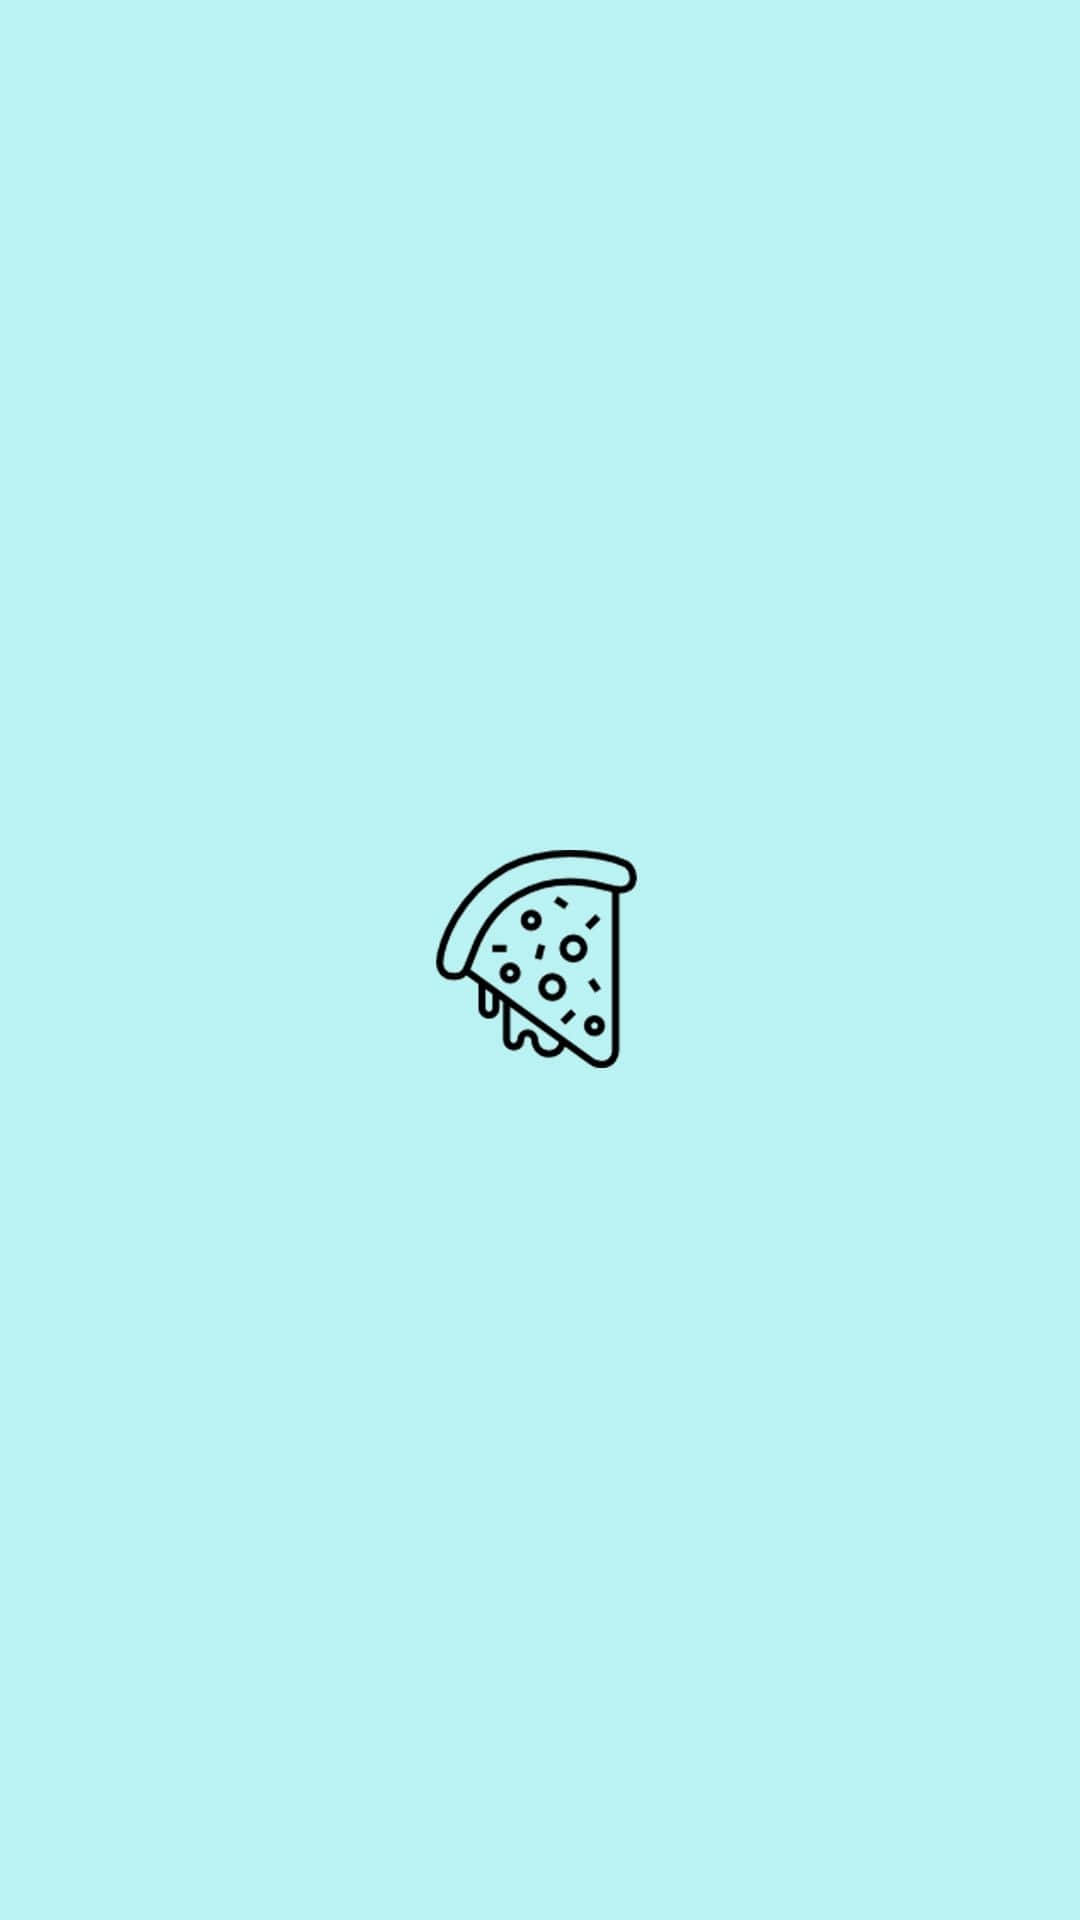 A Slice Of Pizza On A Blue Background